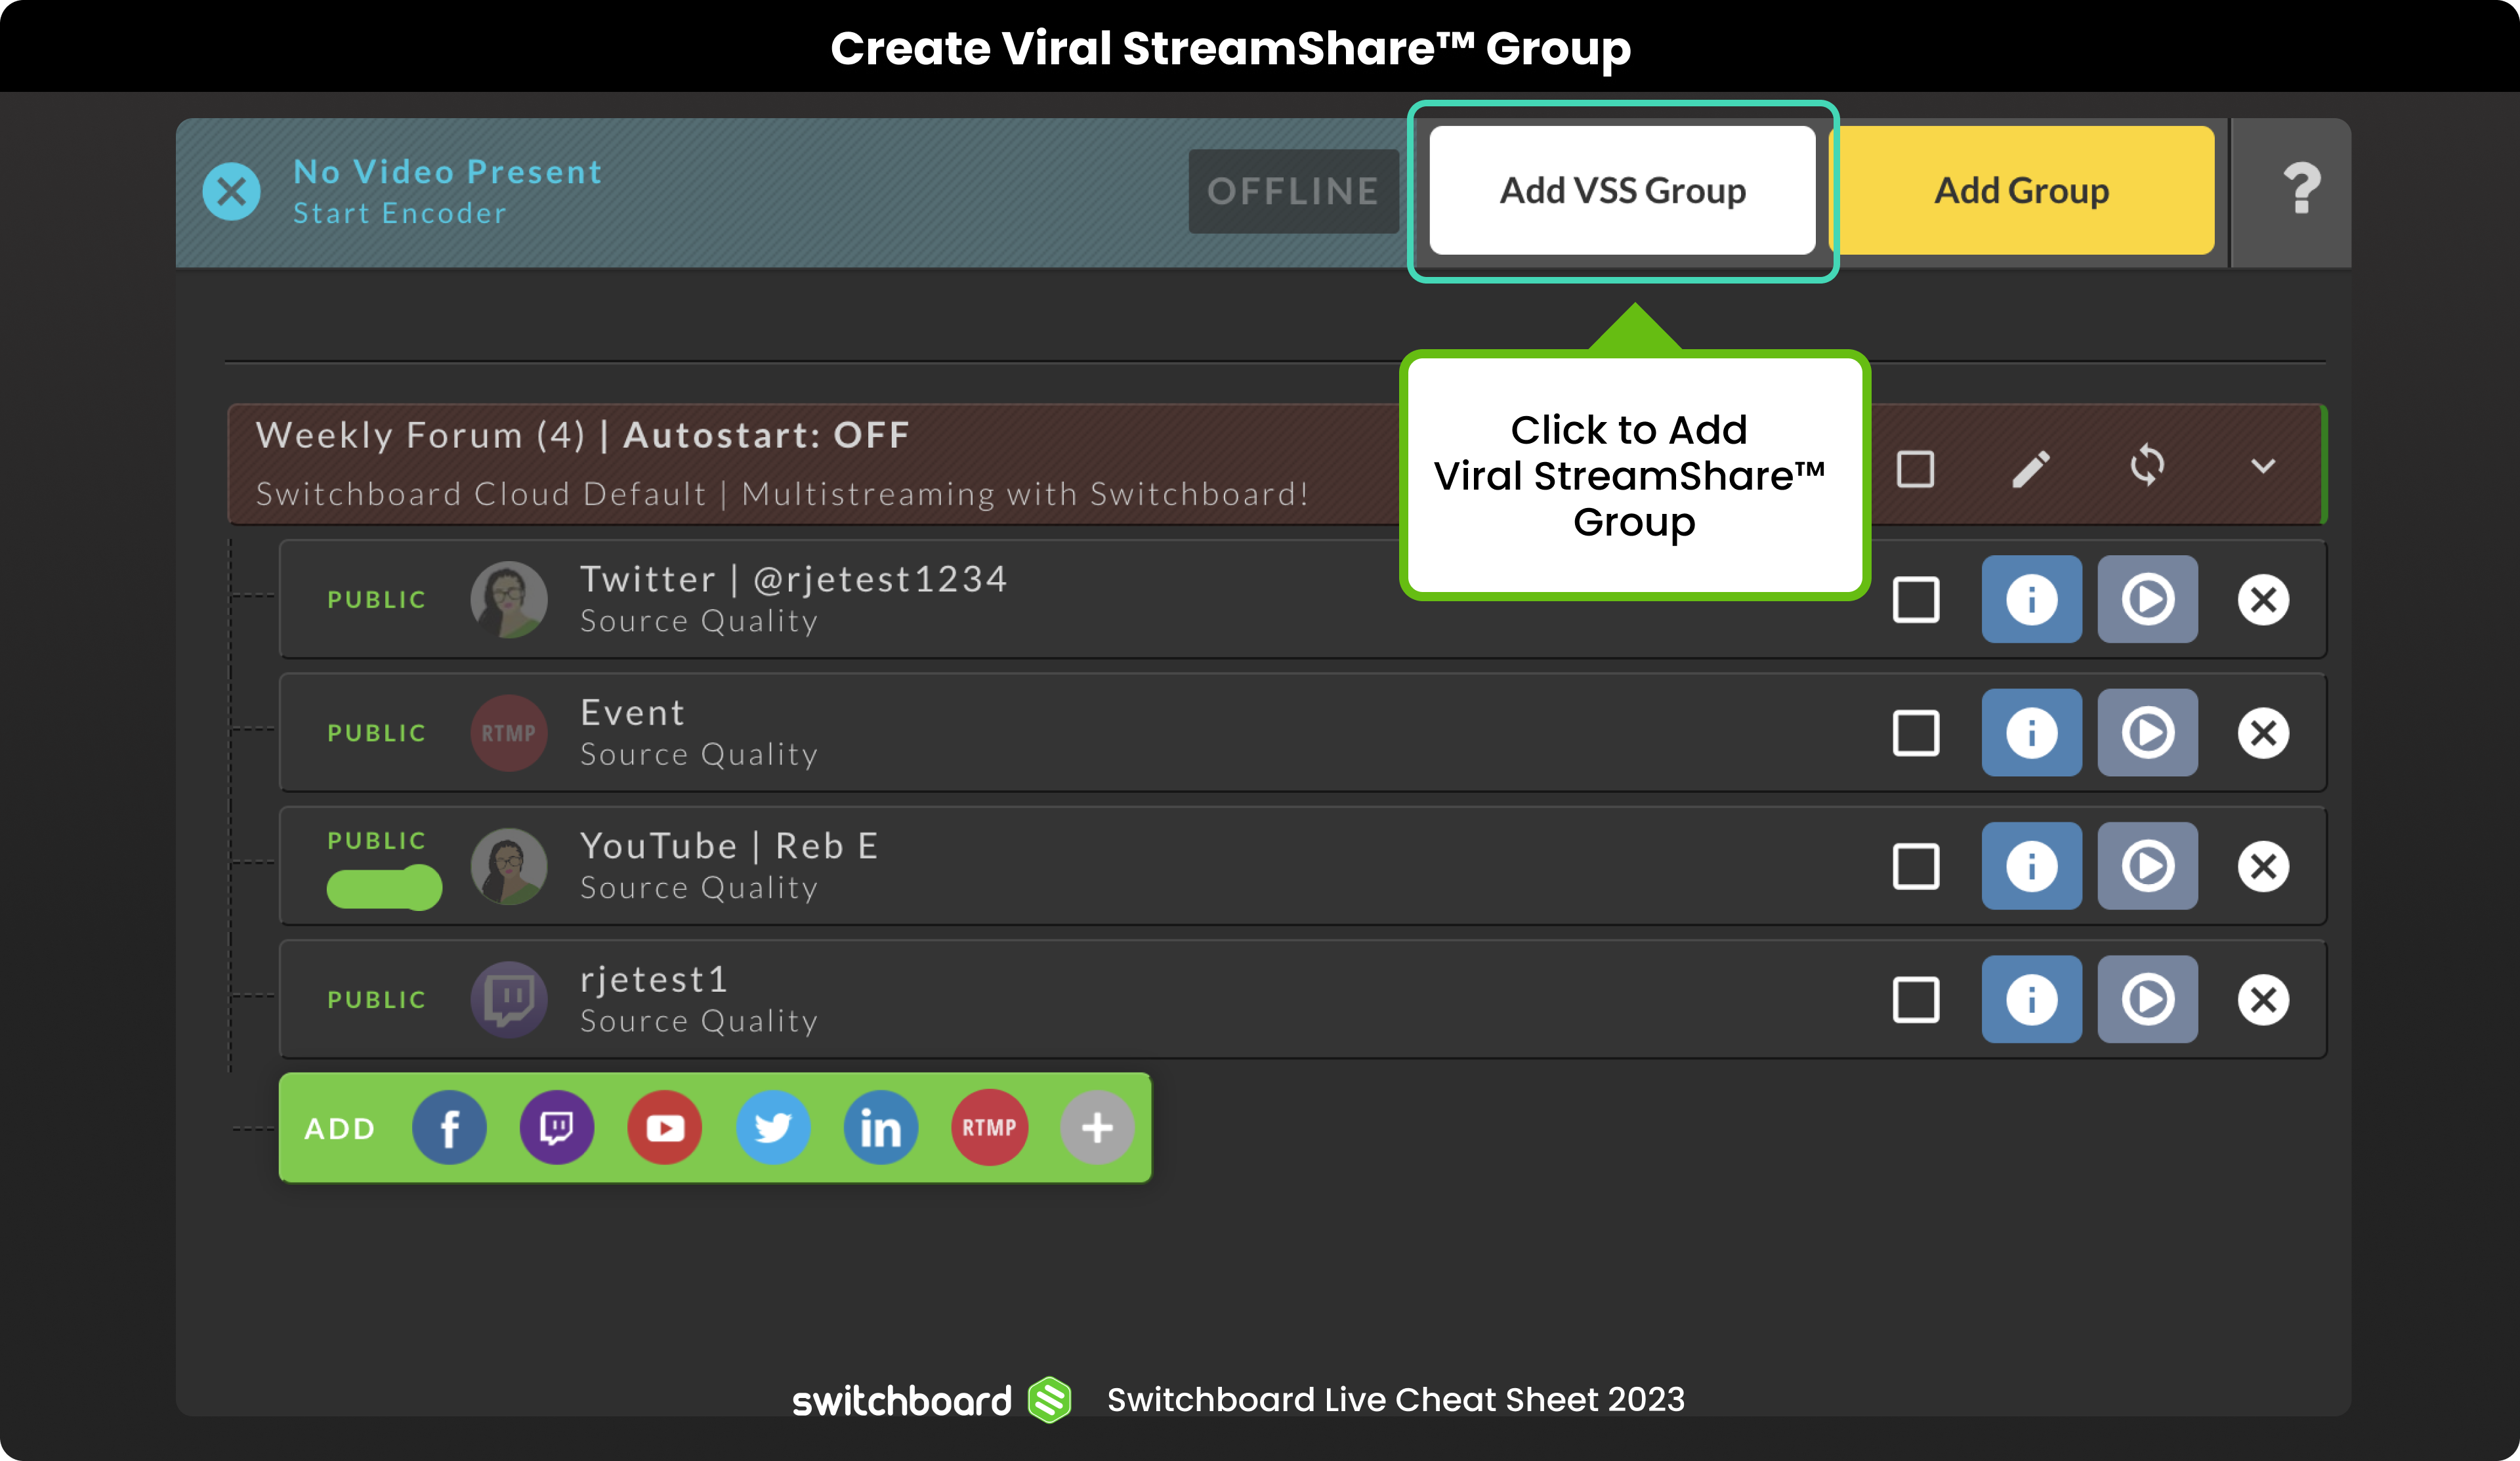 switchboard_live_create_Viral_StreamShare™_group.png